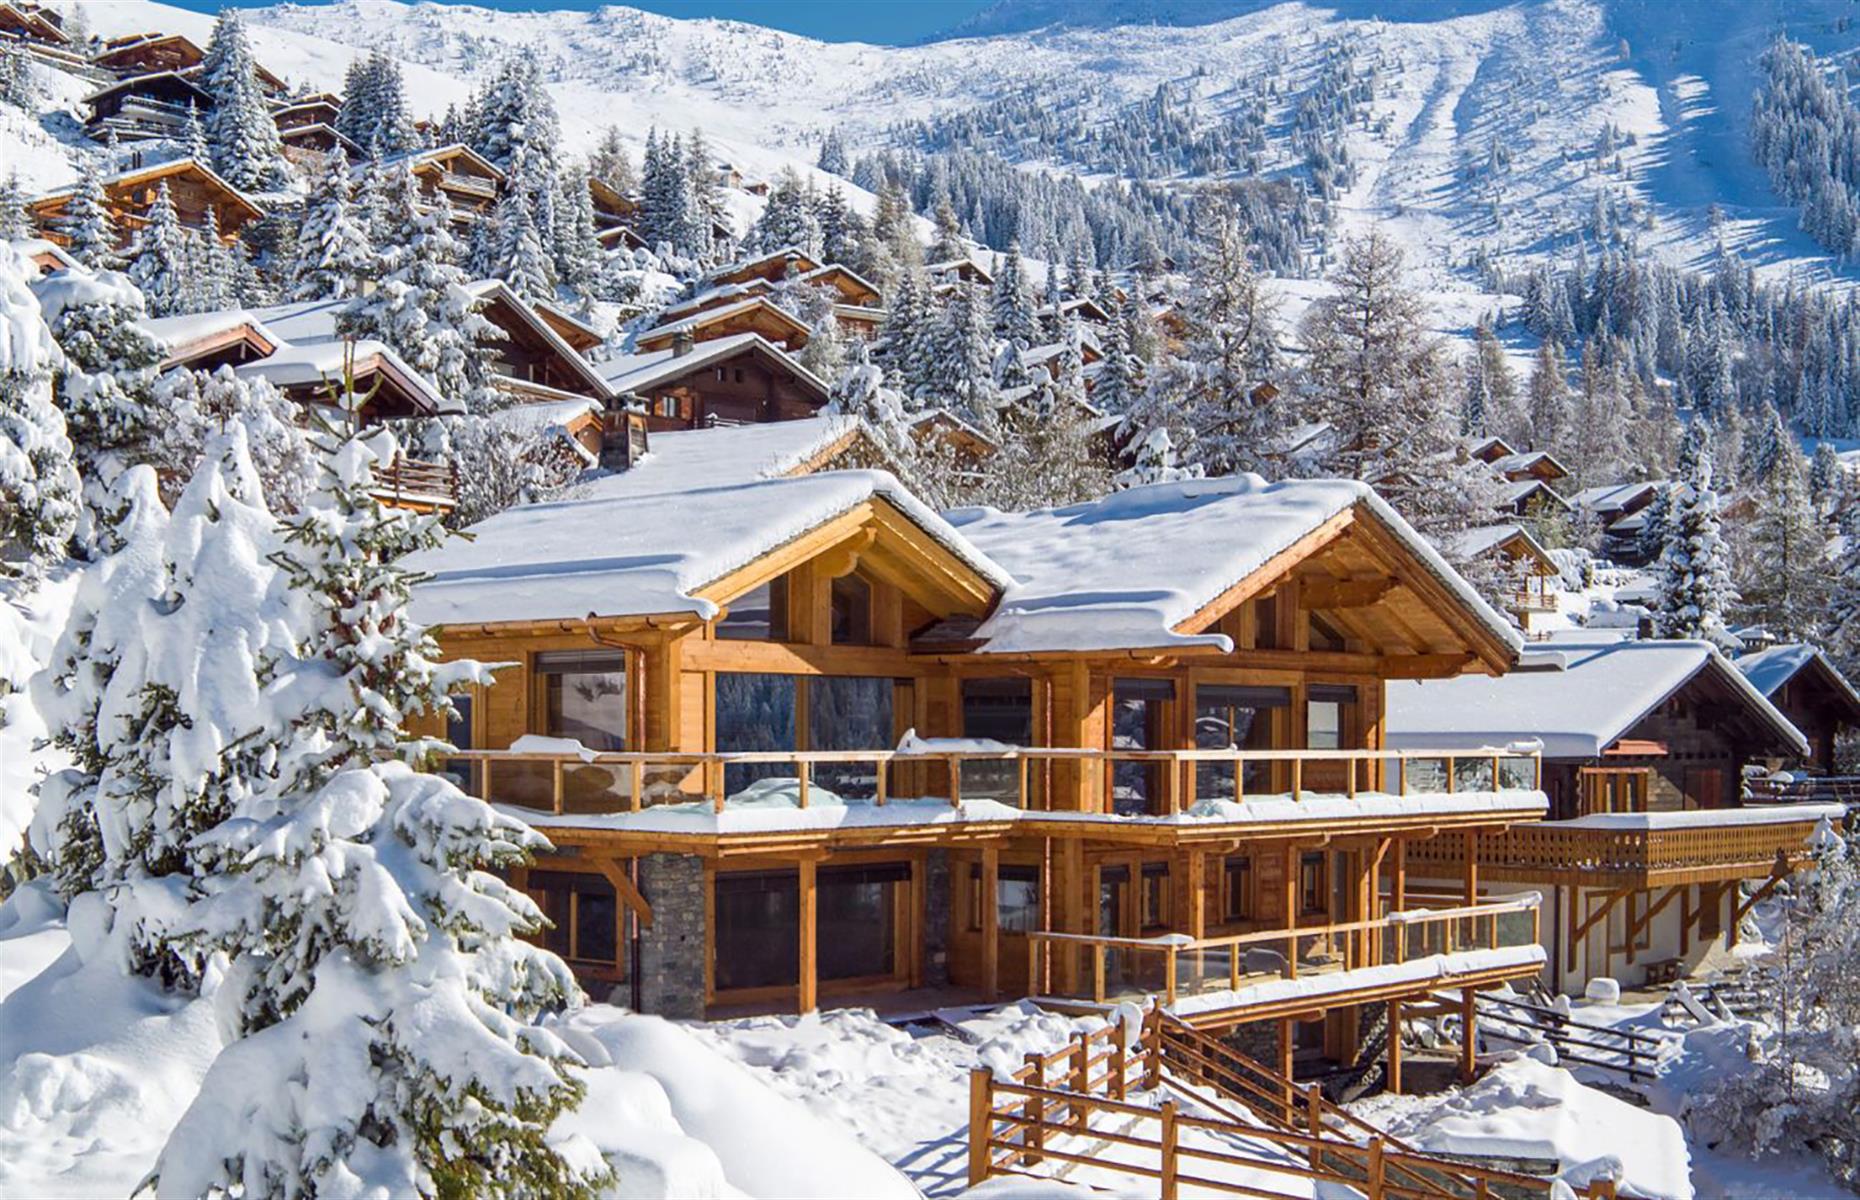 <p>As if plucked straight out of <em>Frozen</em>, <a href="https://www.airbnb.co.uk/luxury/listing/20470158">this six-bedroom chalet</a> offers panoramic views of the Mont Blanc mountain range and snow-clad Verbier. After a day on the slopes, guests can relax in the steamy hammam or hot tub on the terrace, overlooking the gardens. It's equally as charming in summer when the lush green hills are covered in fragrant wildflowers.</p>